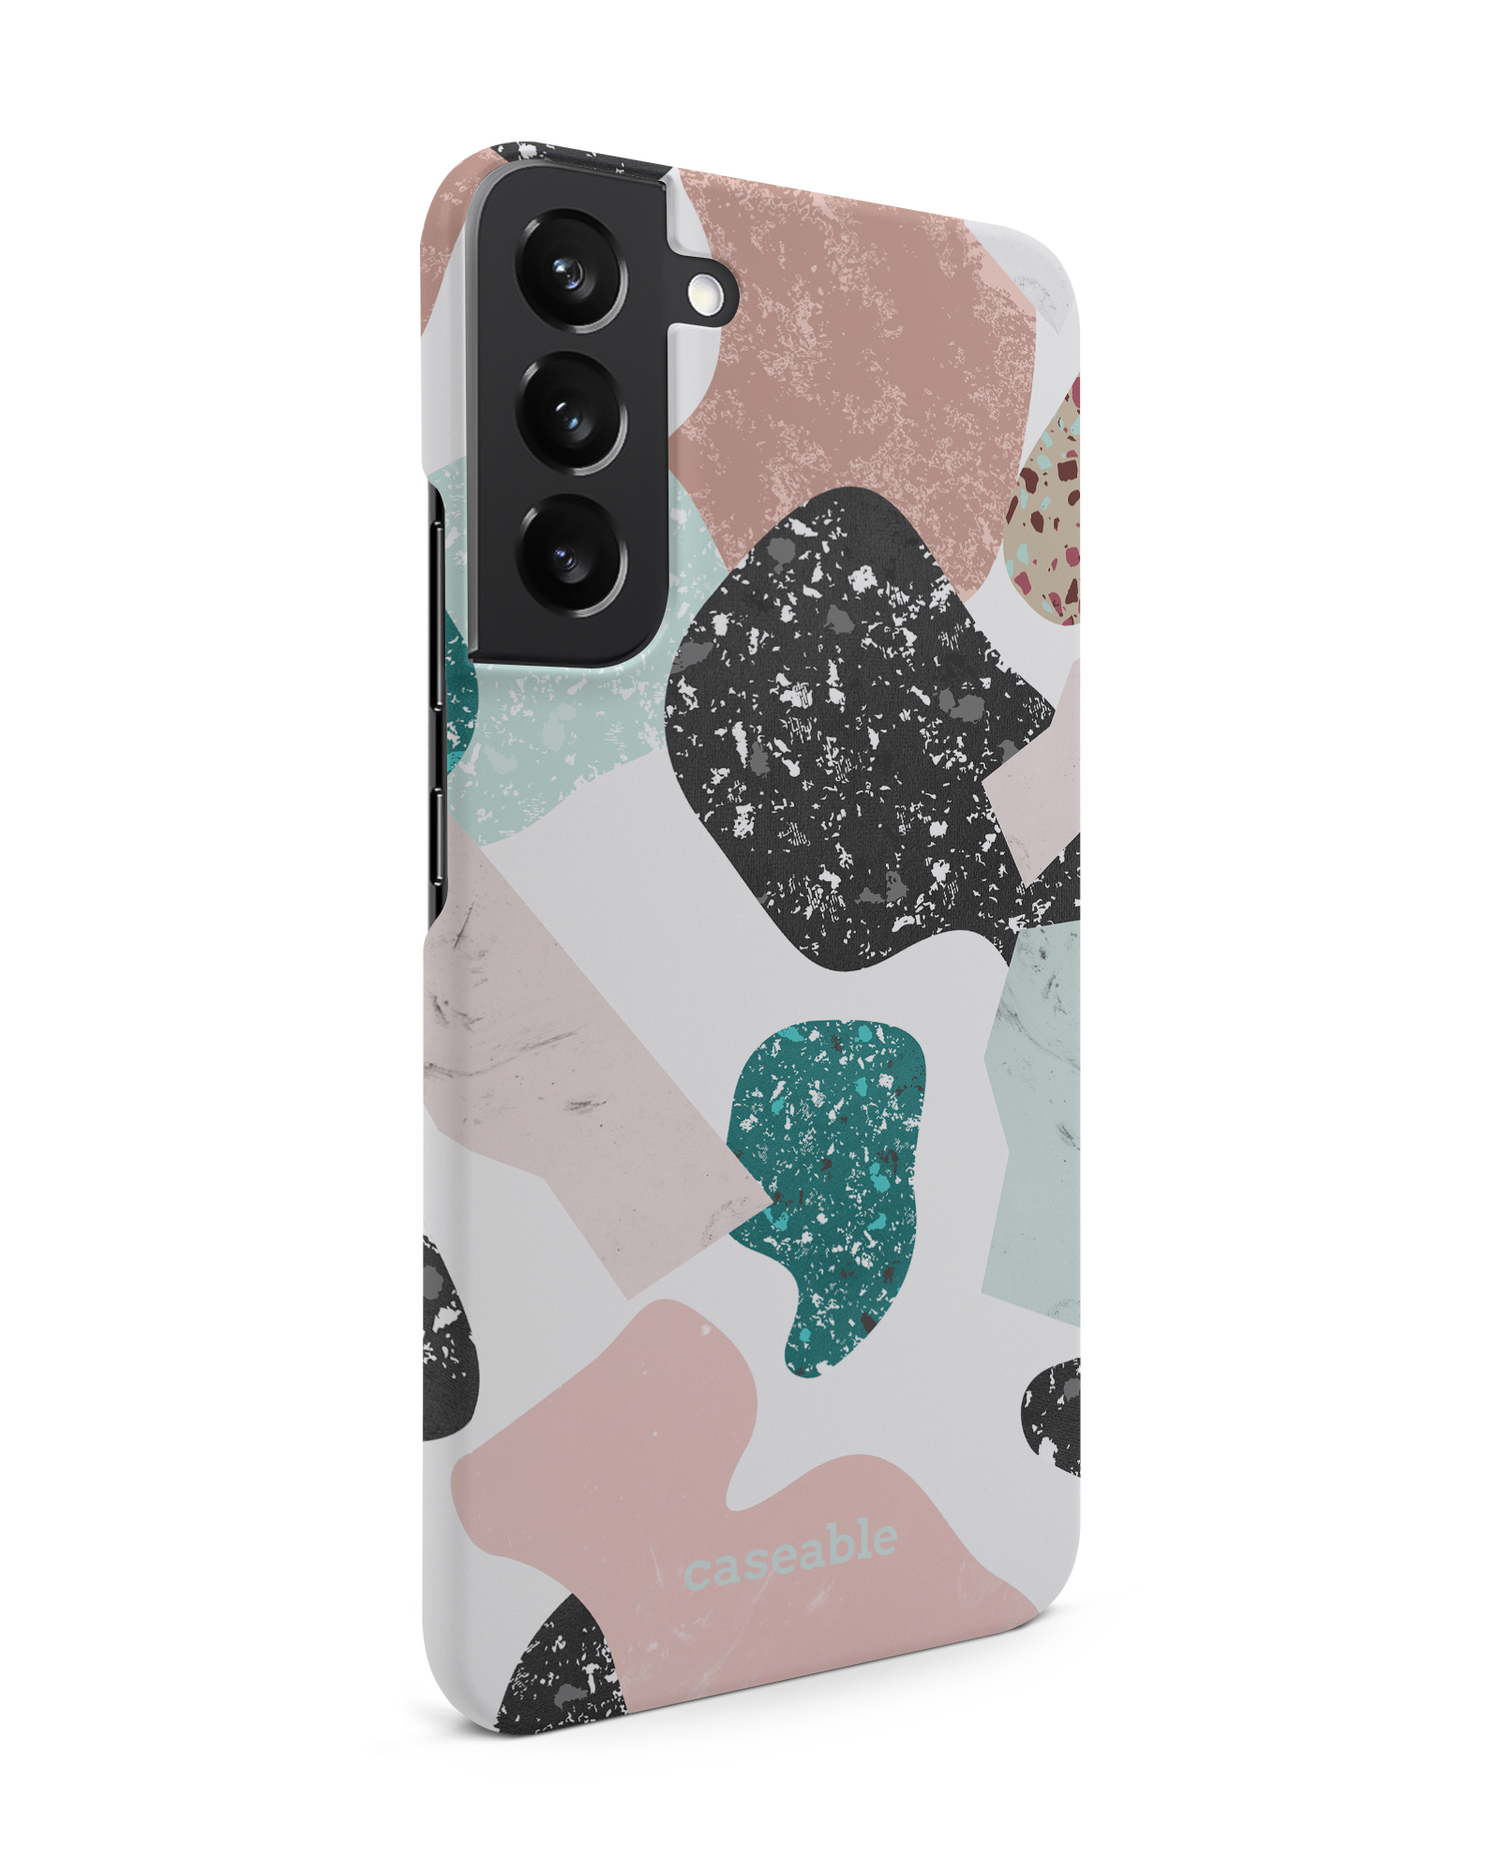 Scattered Shapes Hard Shell Phone Case Samsung Galaxy S22 Plus 5G: View from the left side